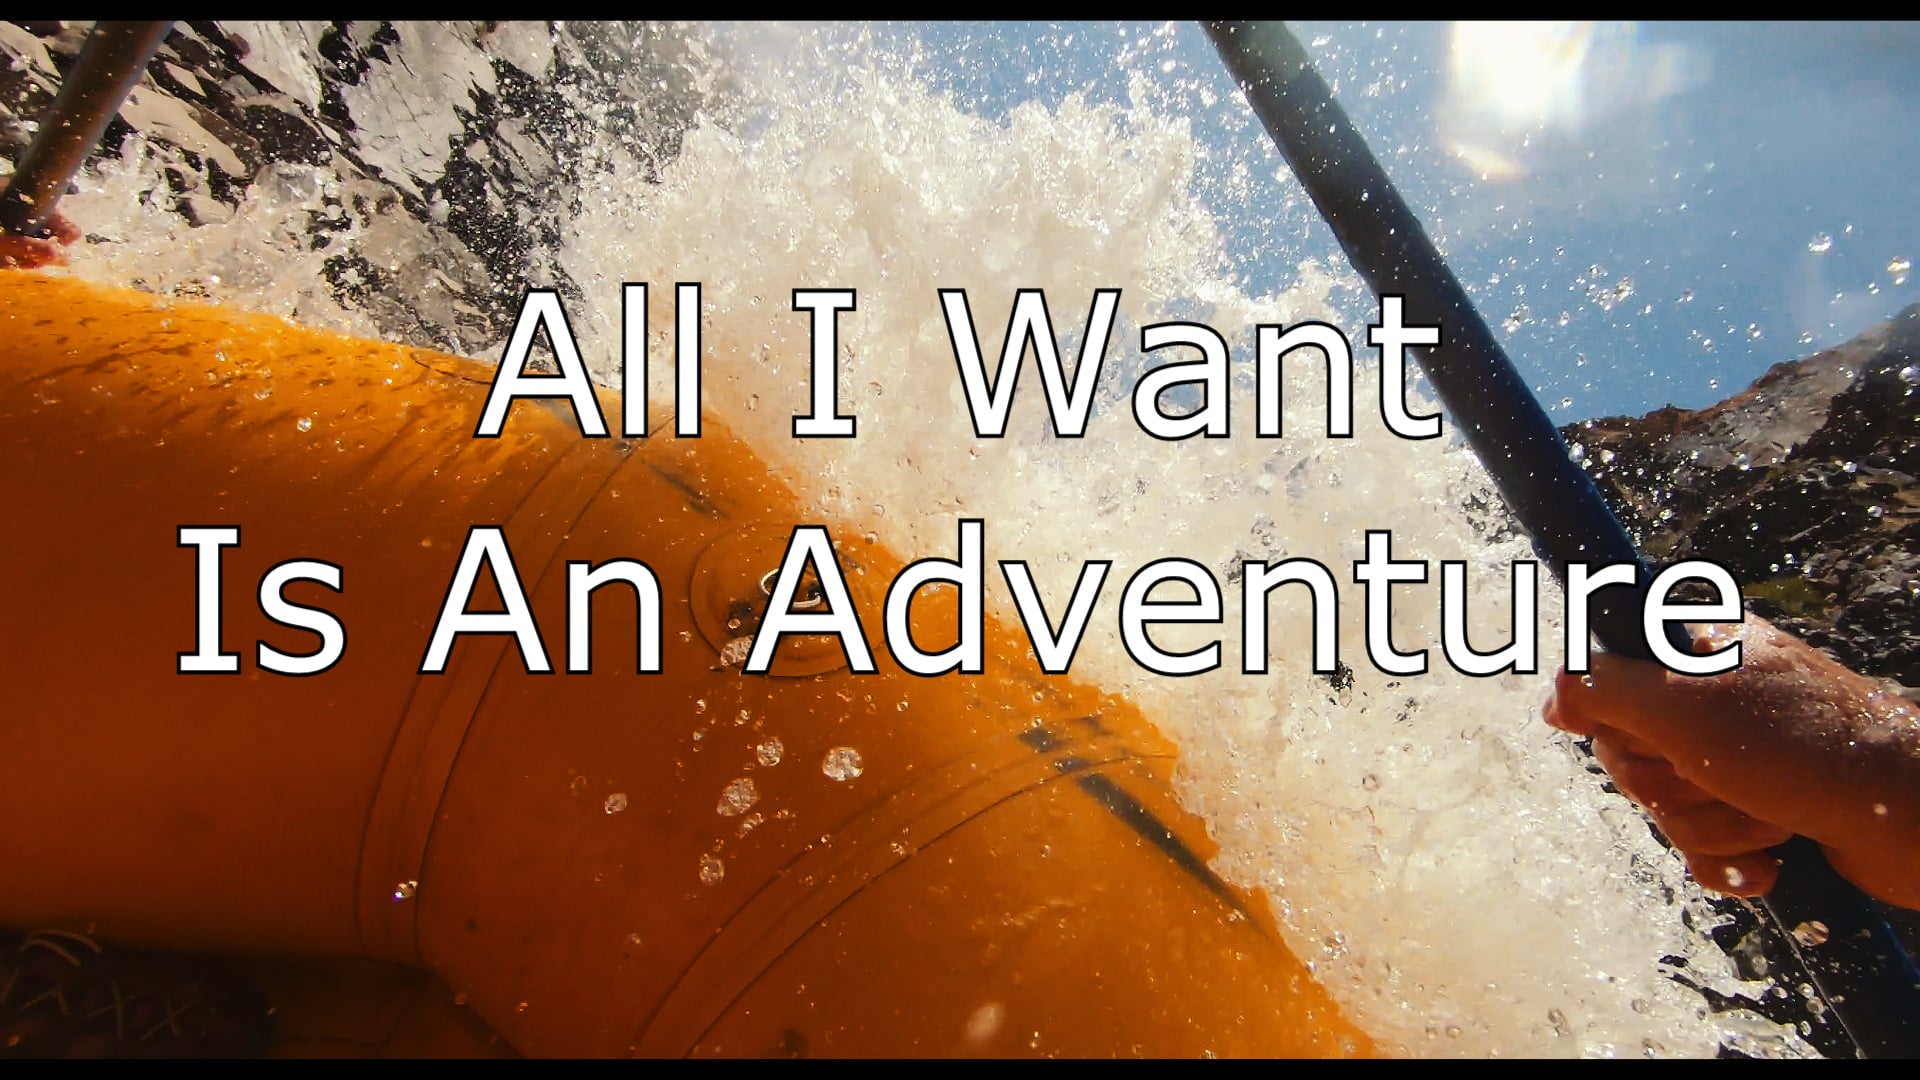 All I Want Is An Adventure